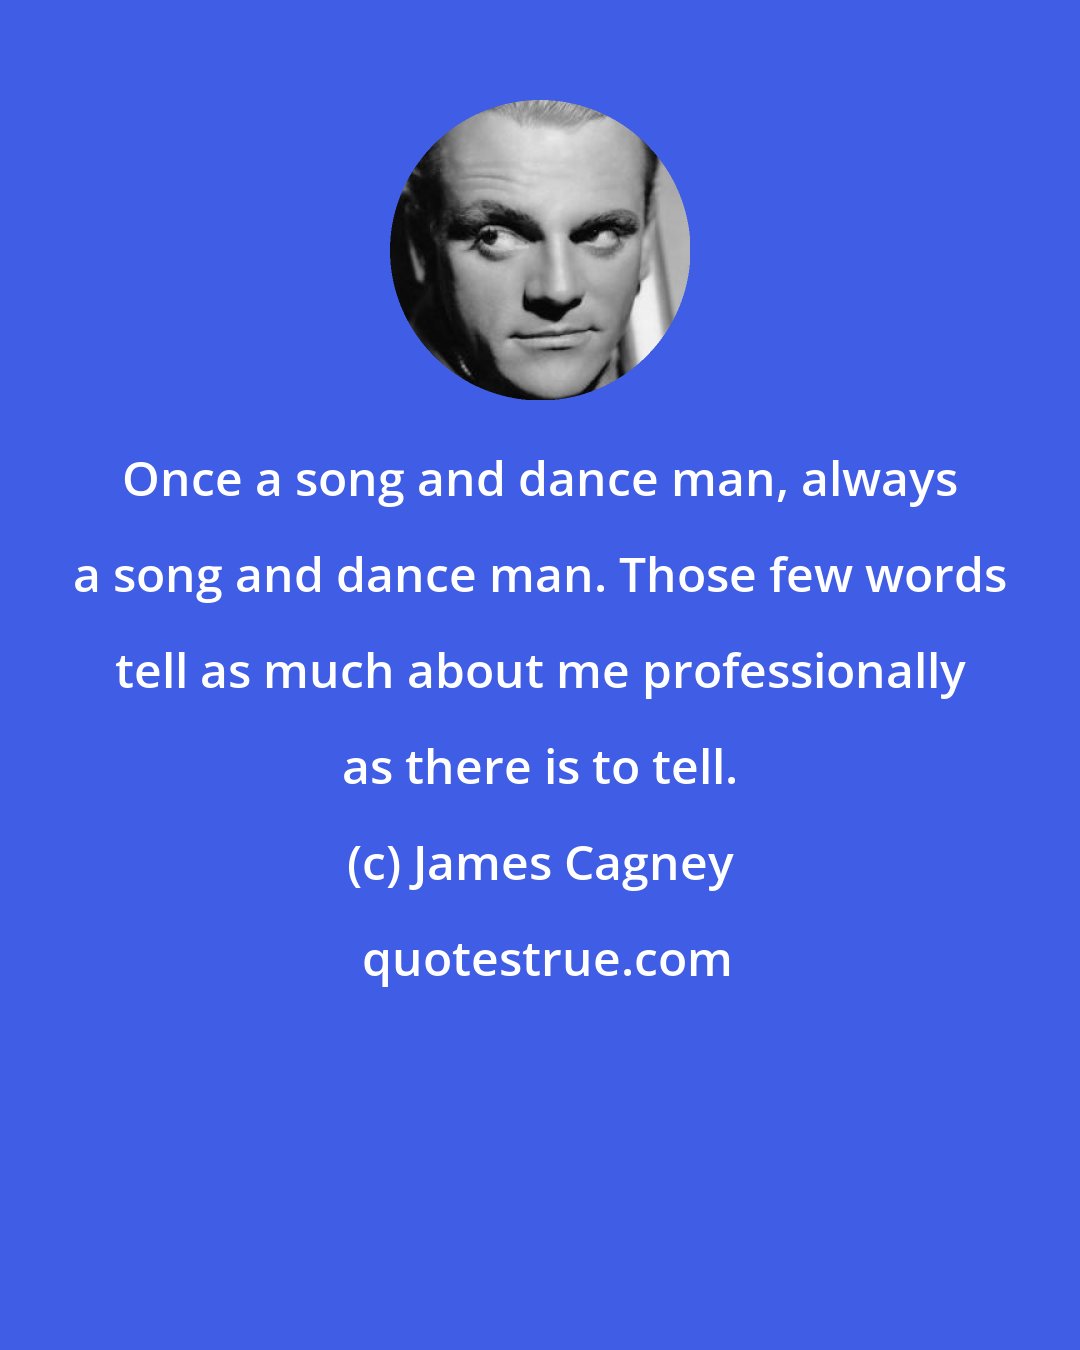 James Cagney: Once a song and dance man, always a song and dance man. Those few words tell as much about me professionally as there is to tell.